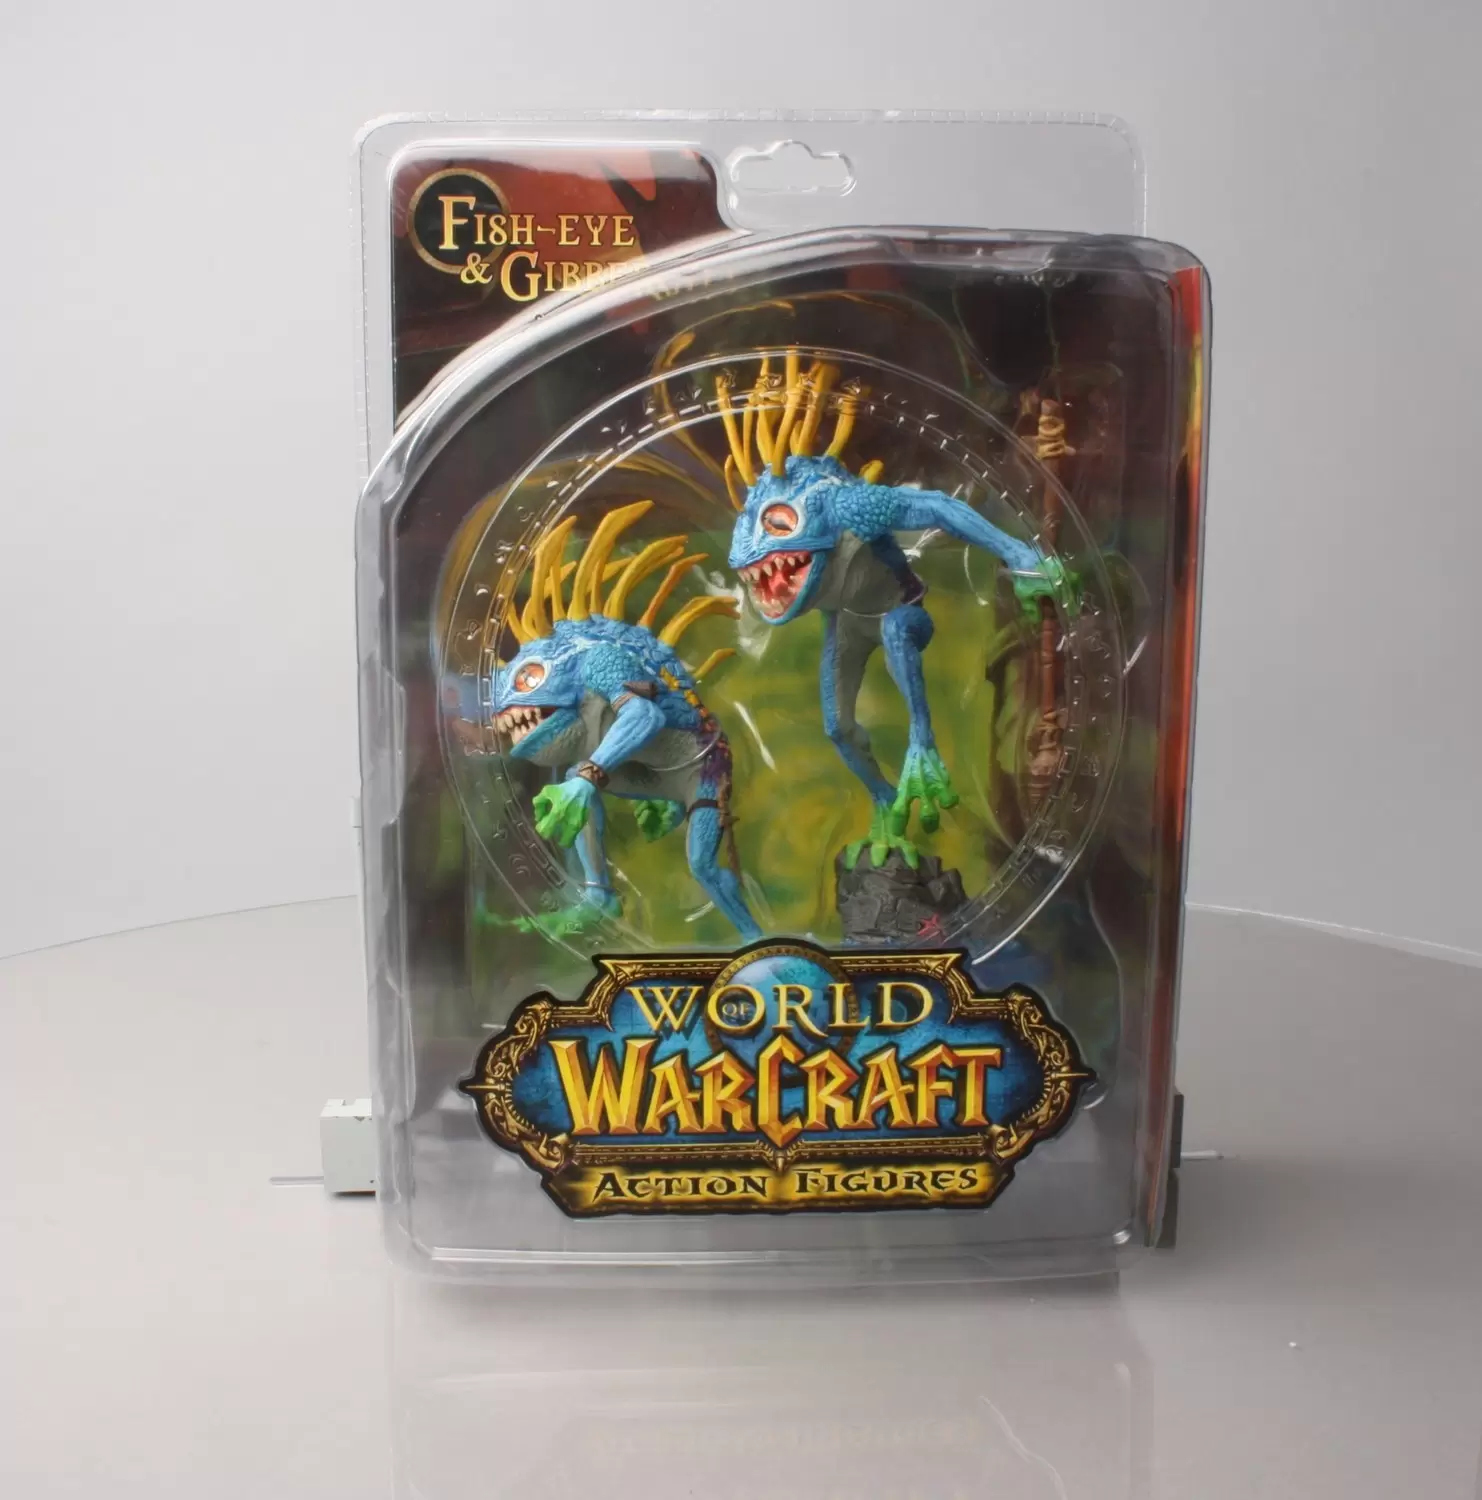 World of Warcraft Action Figures (WOW) - Fish-Eye & Gibbergill Blue